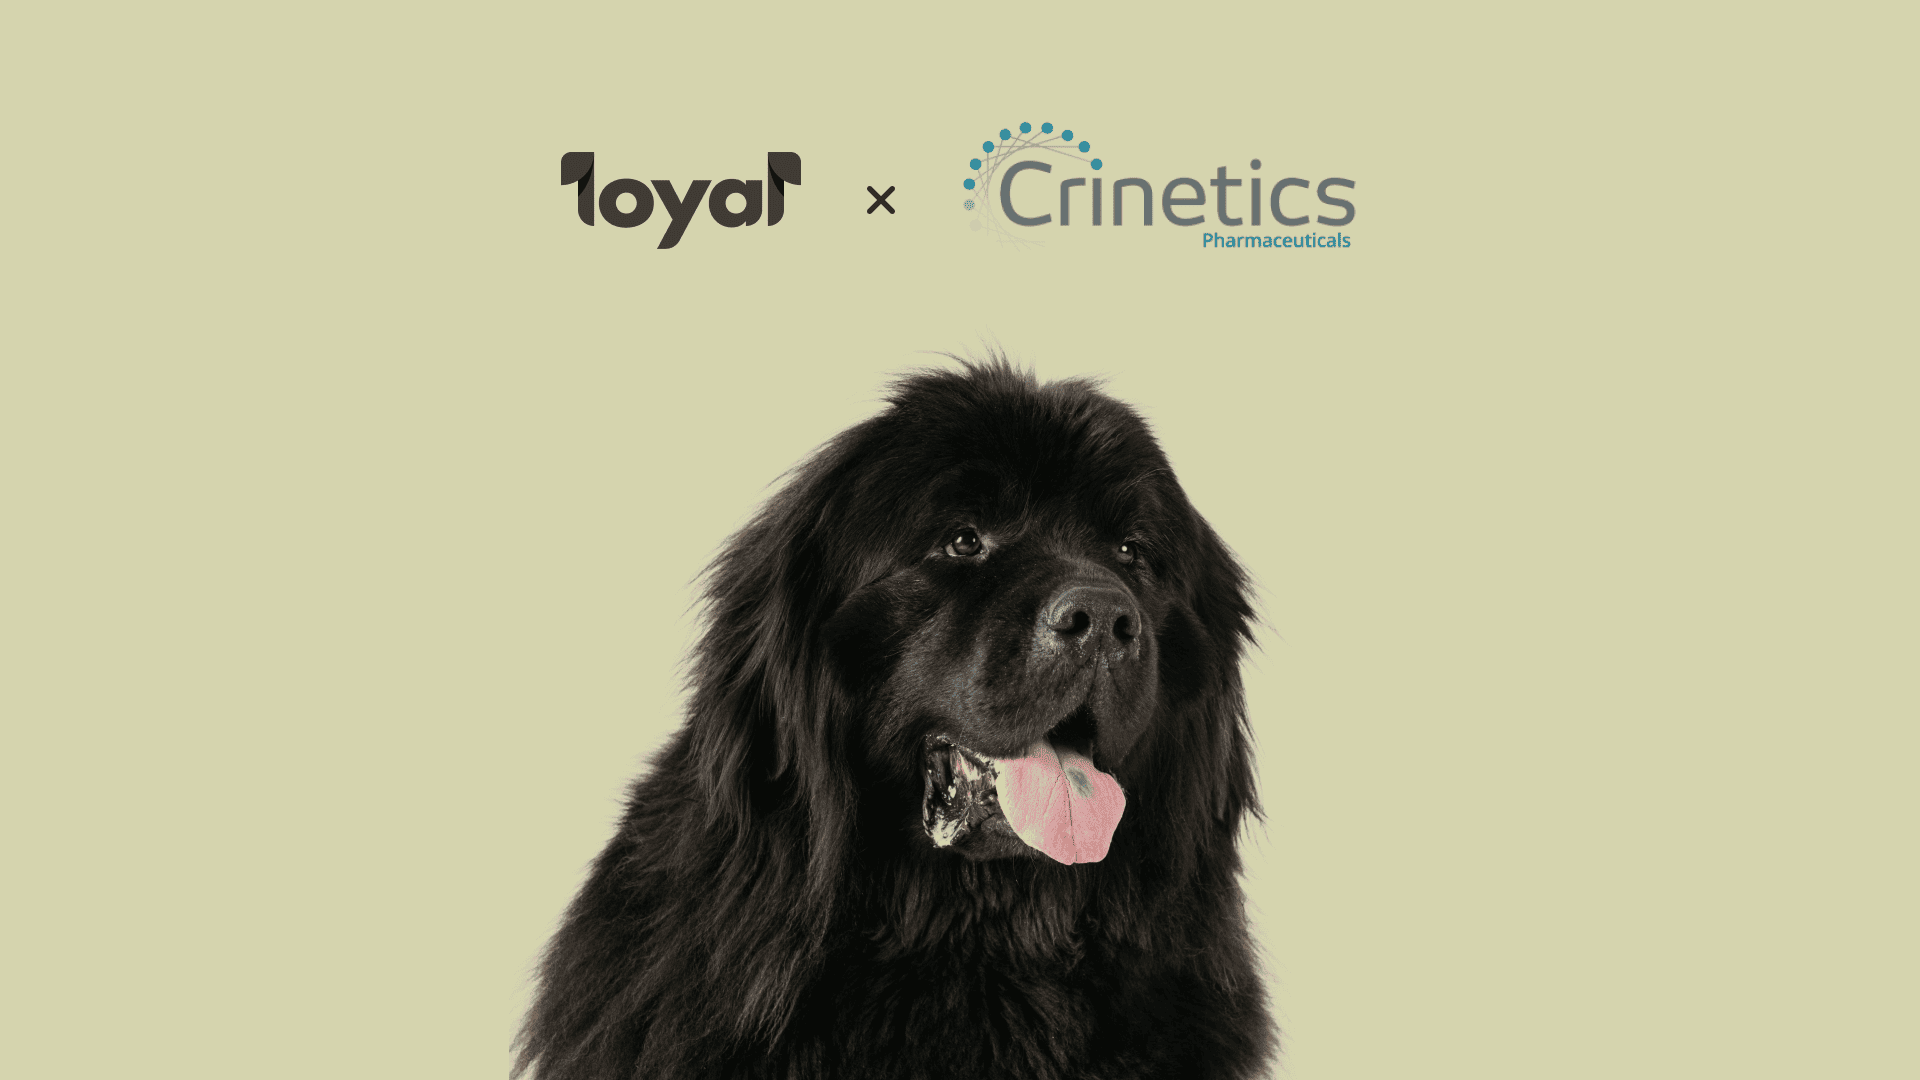 Cover Image for Announcing our partnership with Crinetics Pharmaceuticals